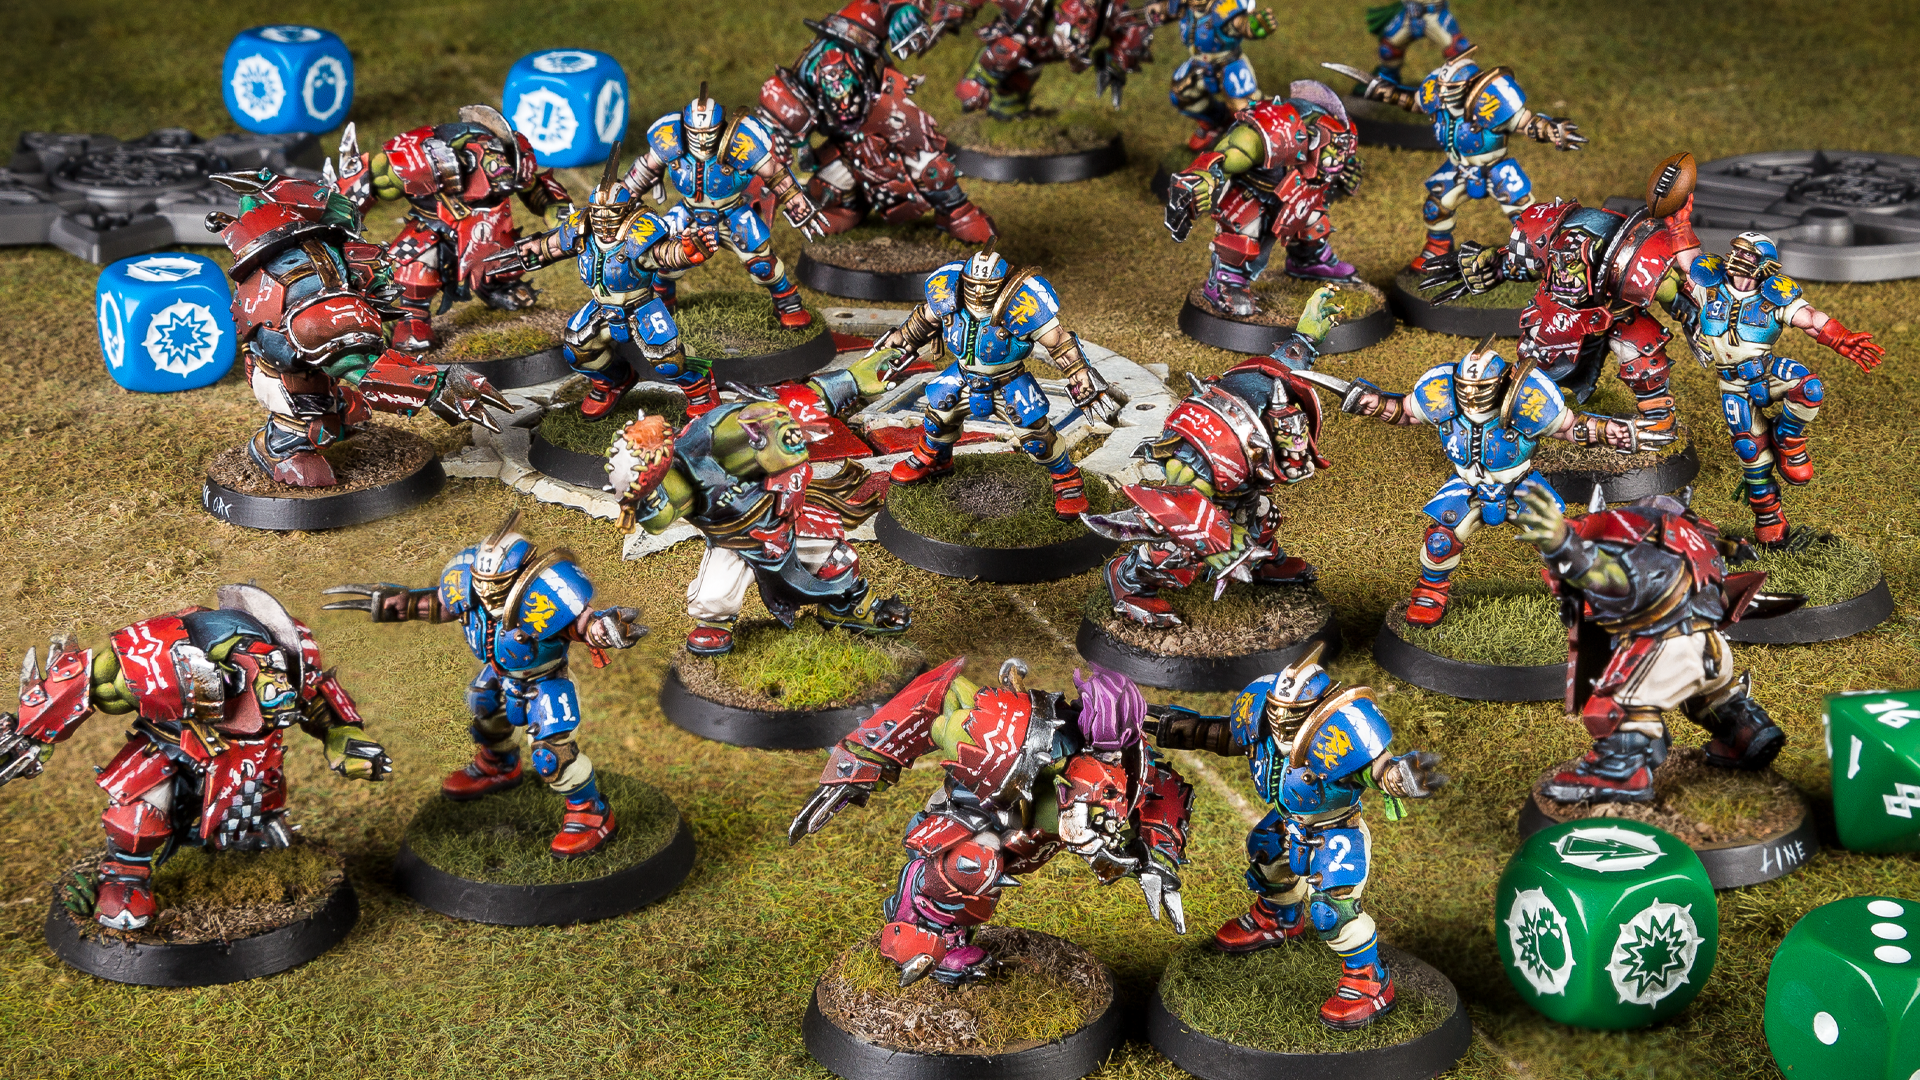 Image for Warhammer’s hilarious fantasy football game Blood Bowl makes failure half the fun